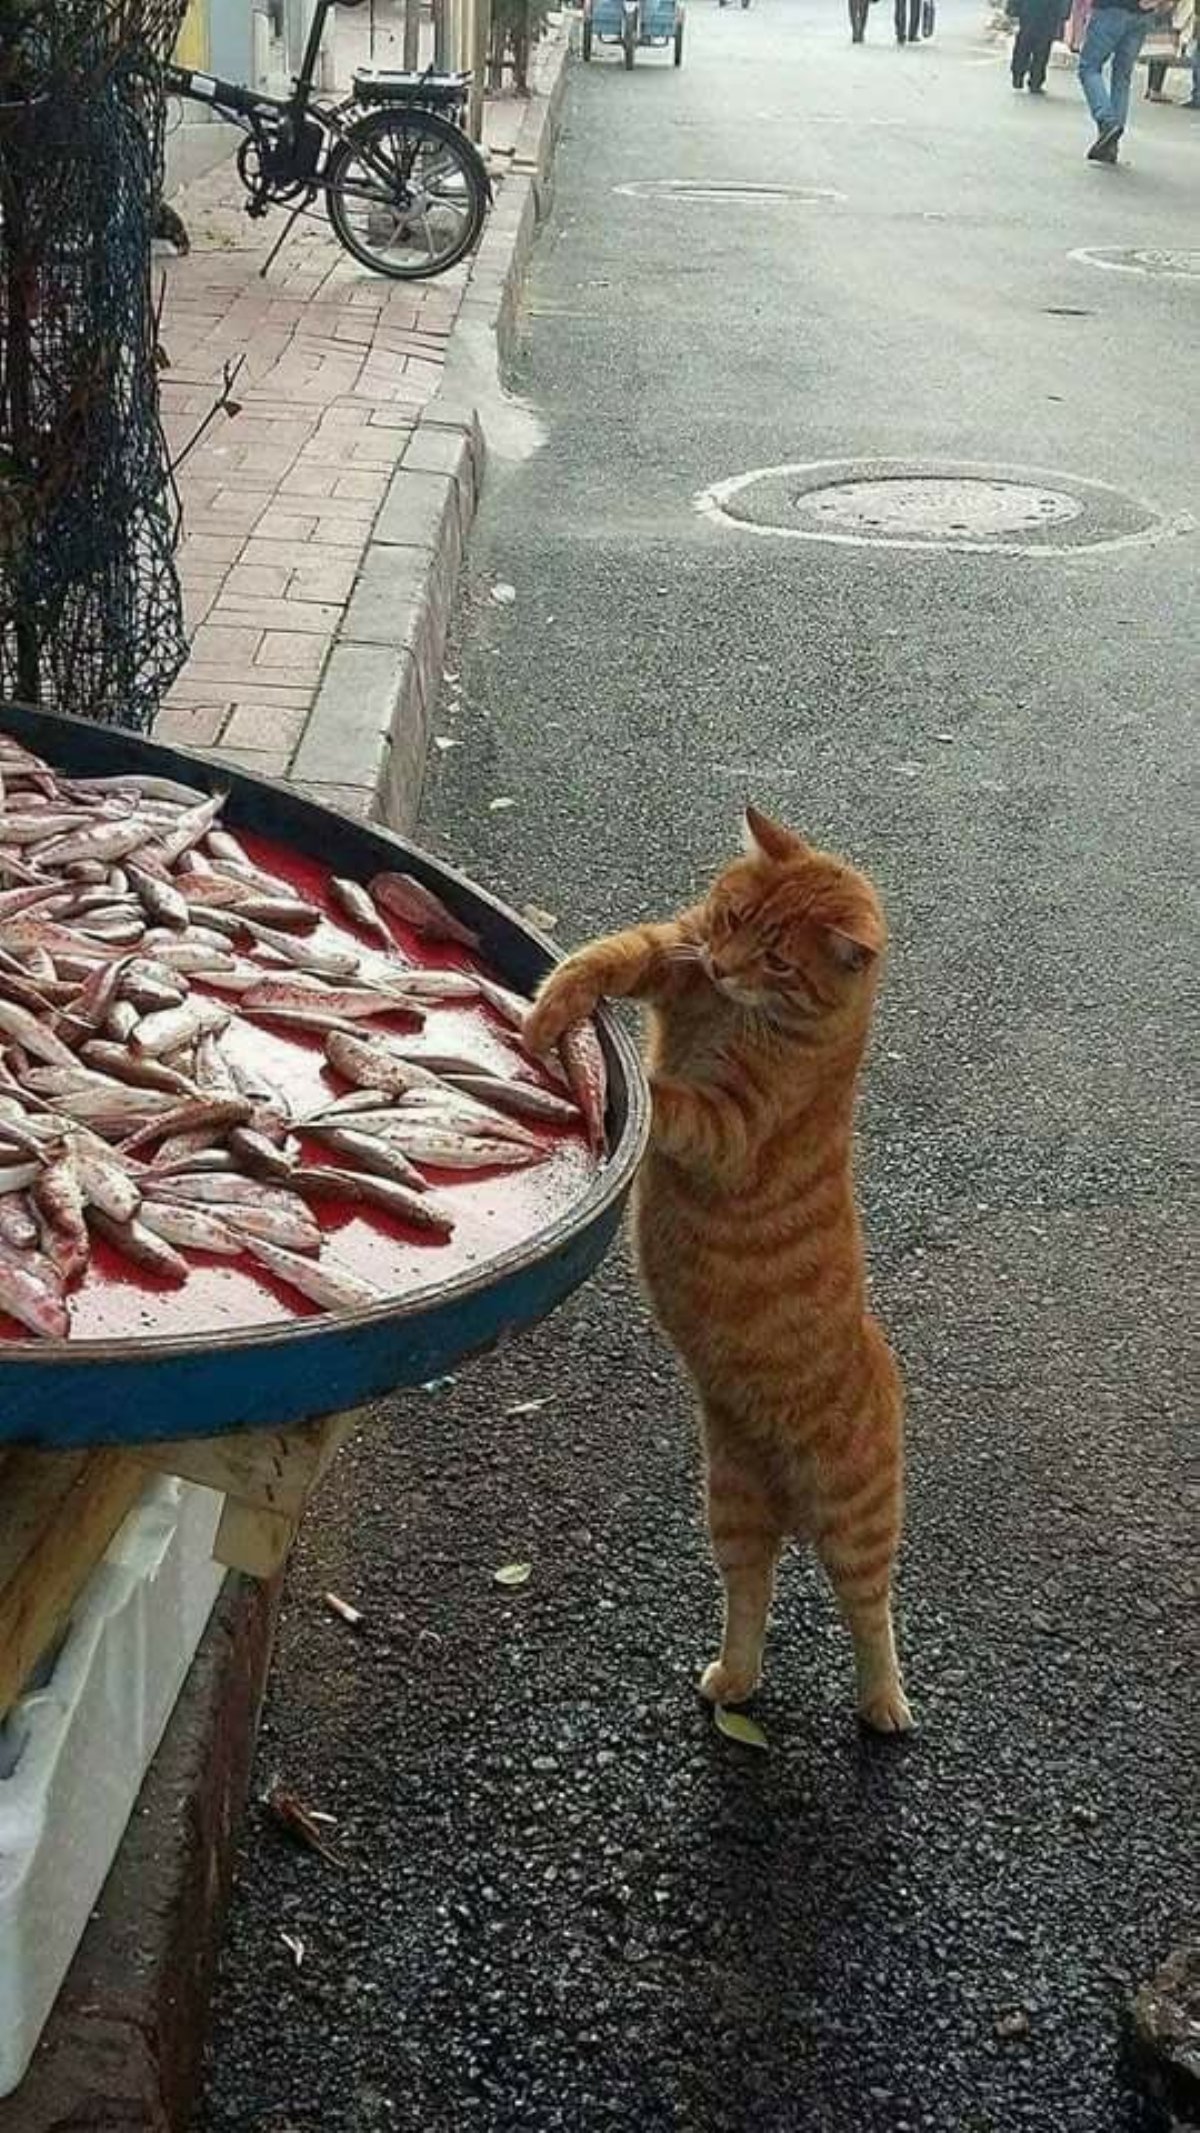 Cat touches fish